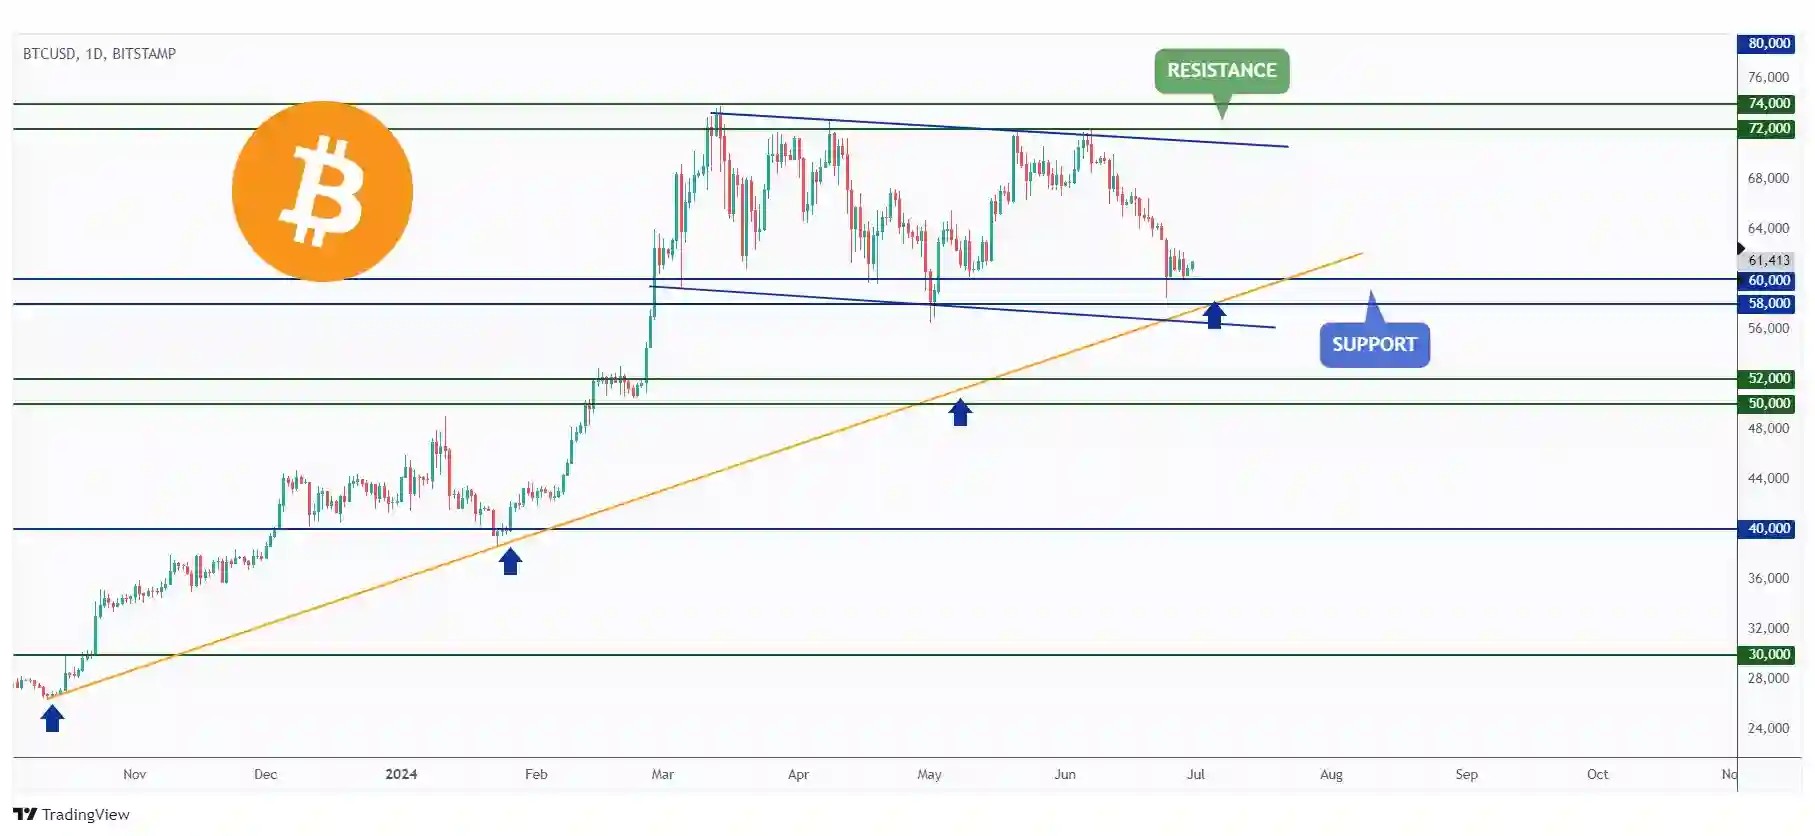 BTC daily chart hovering around the $60,000 support.